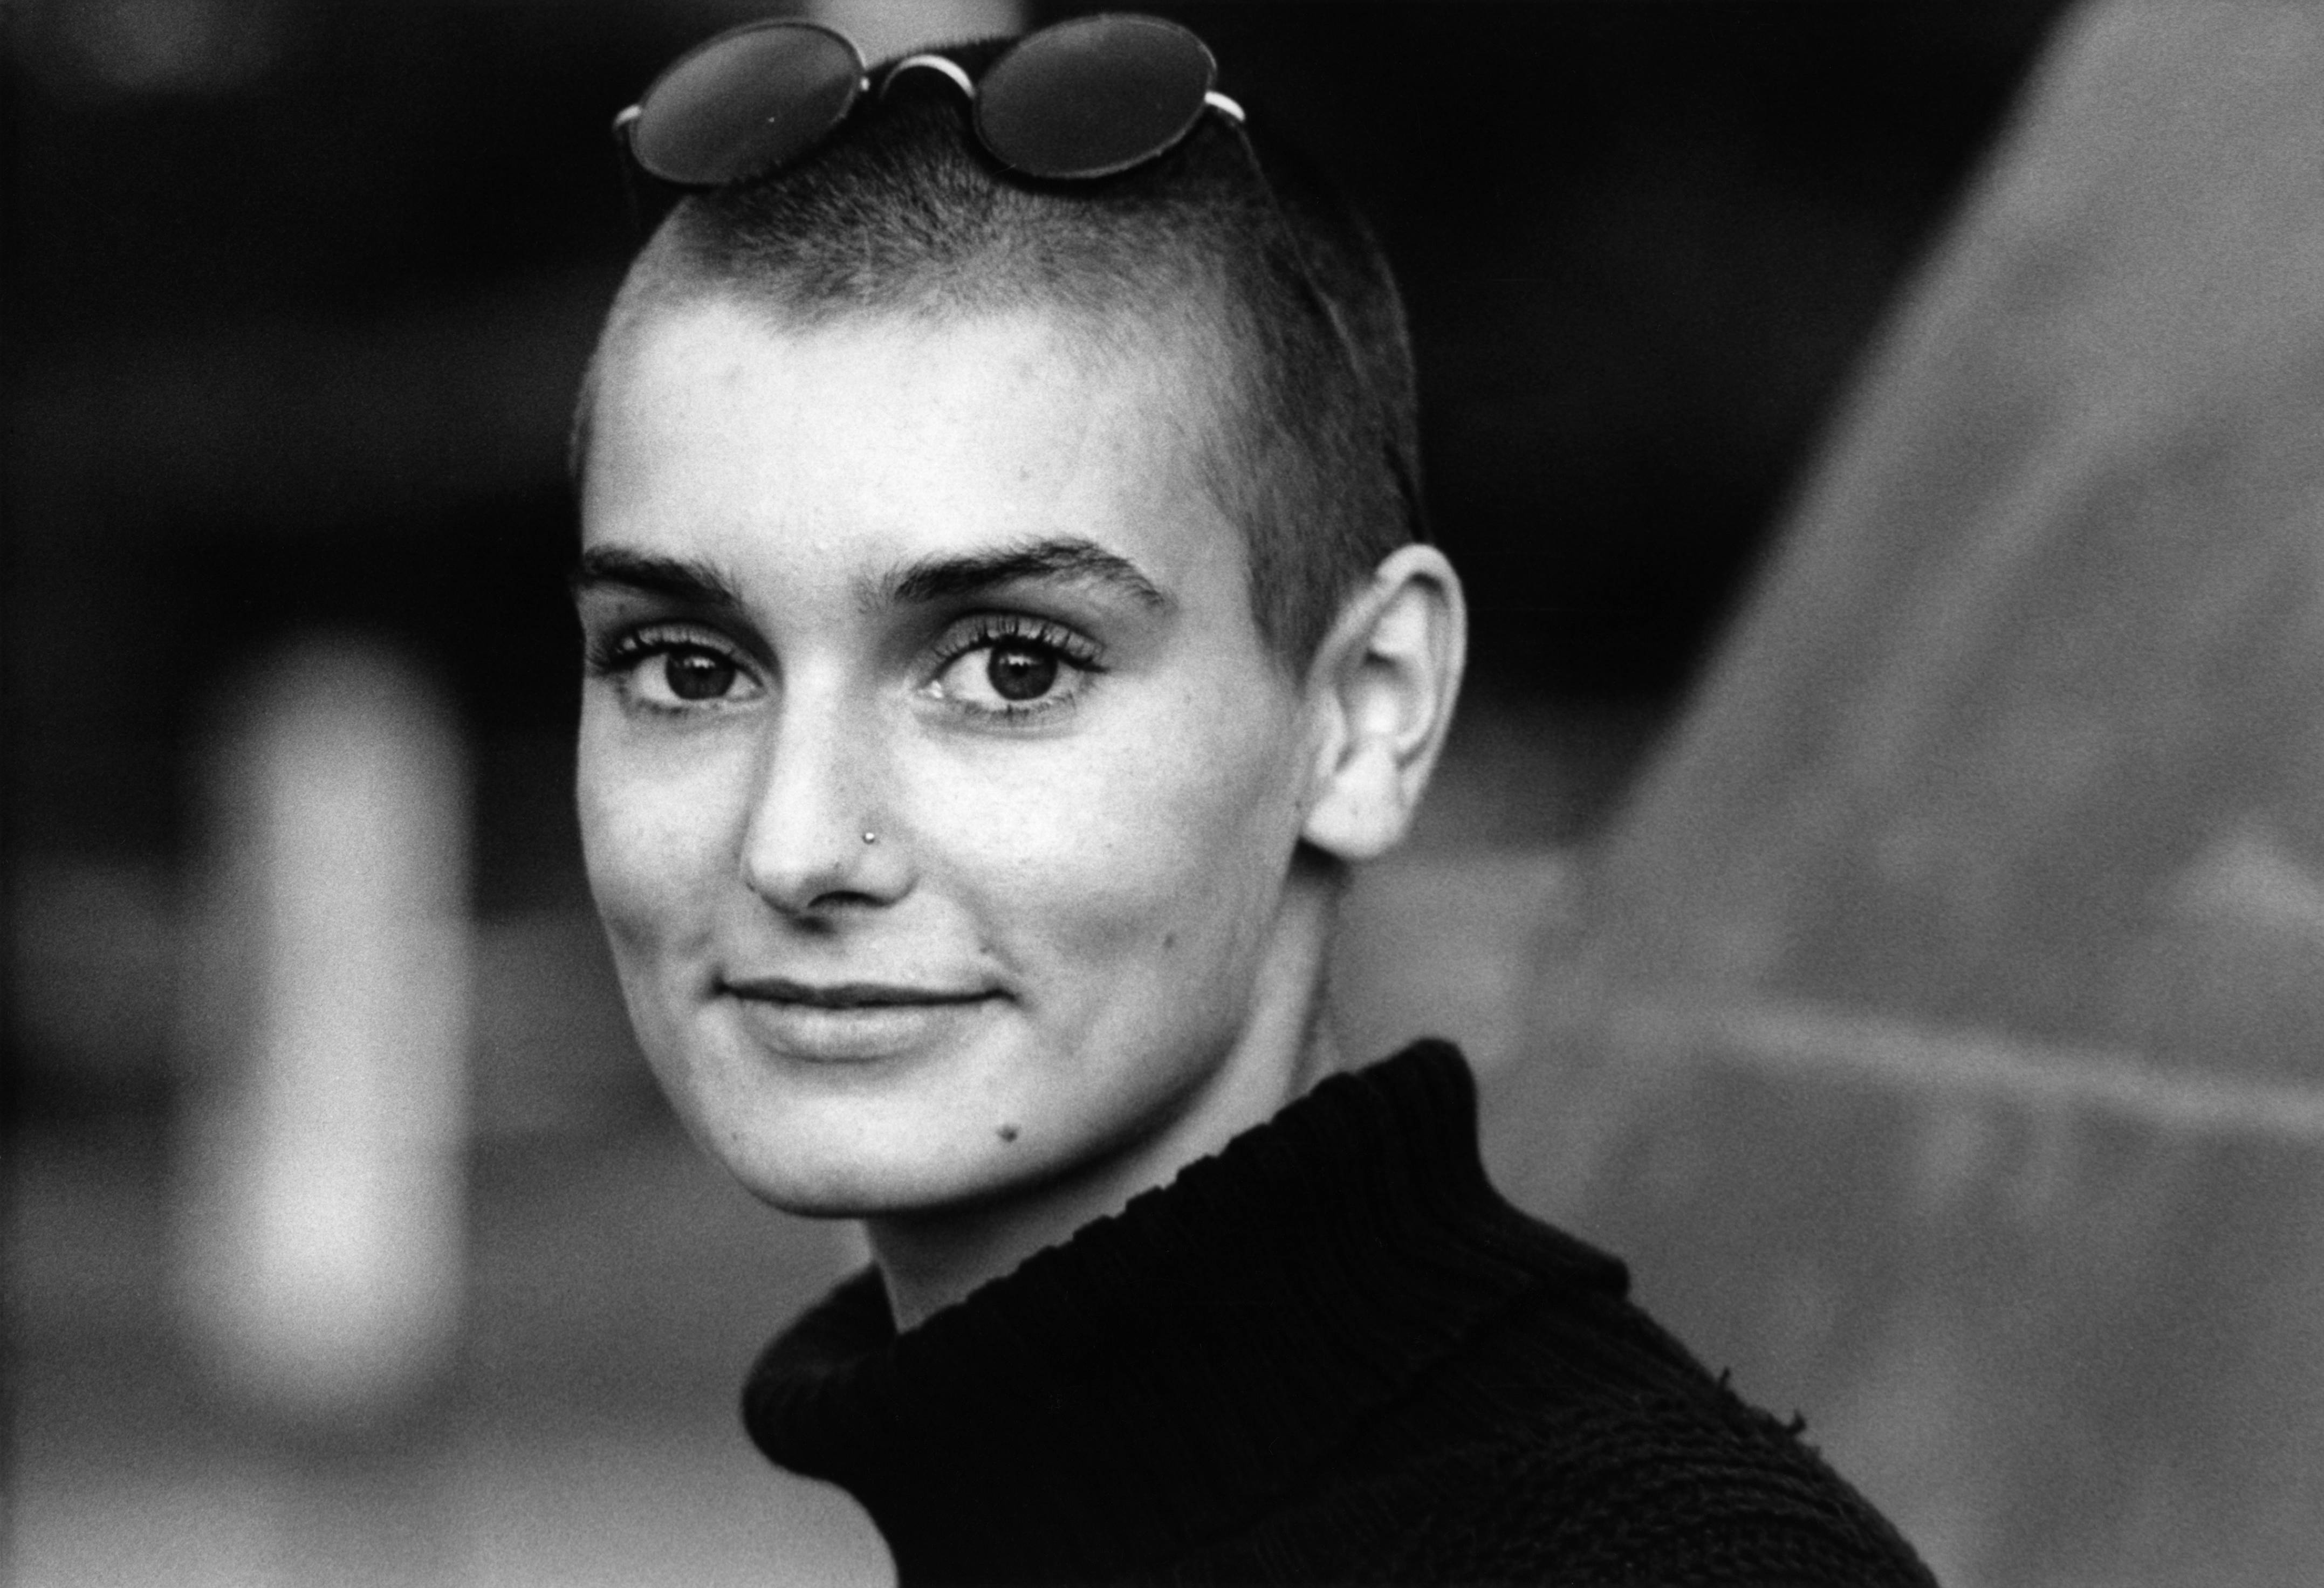 With sunglasses perched on her head, Irish singer Sinéad O'Connor wears a black turtleneck and grins in this 1990 photo.